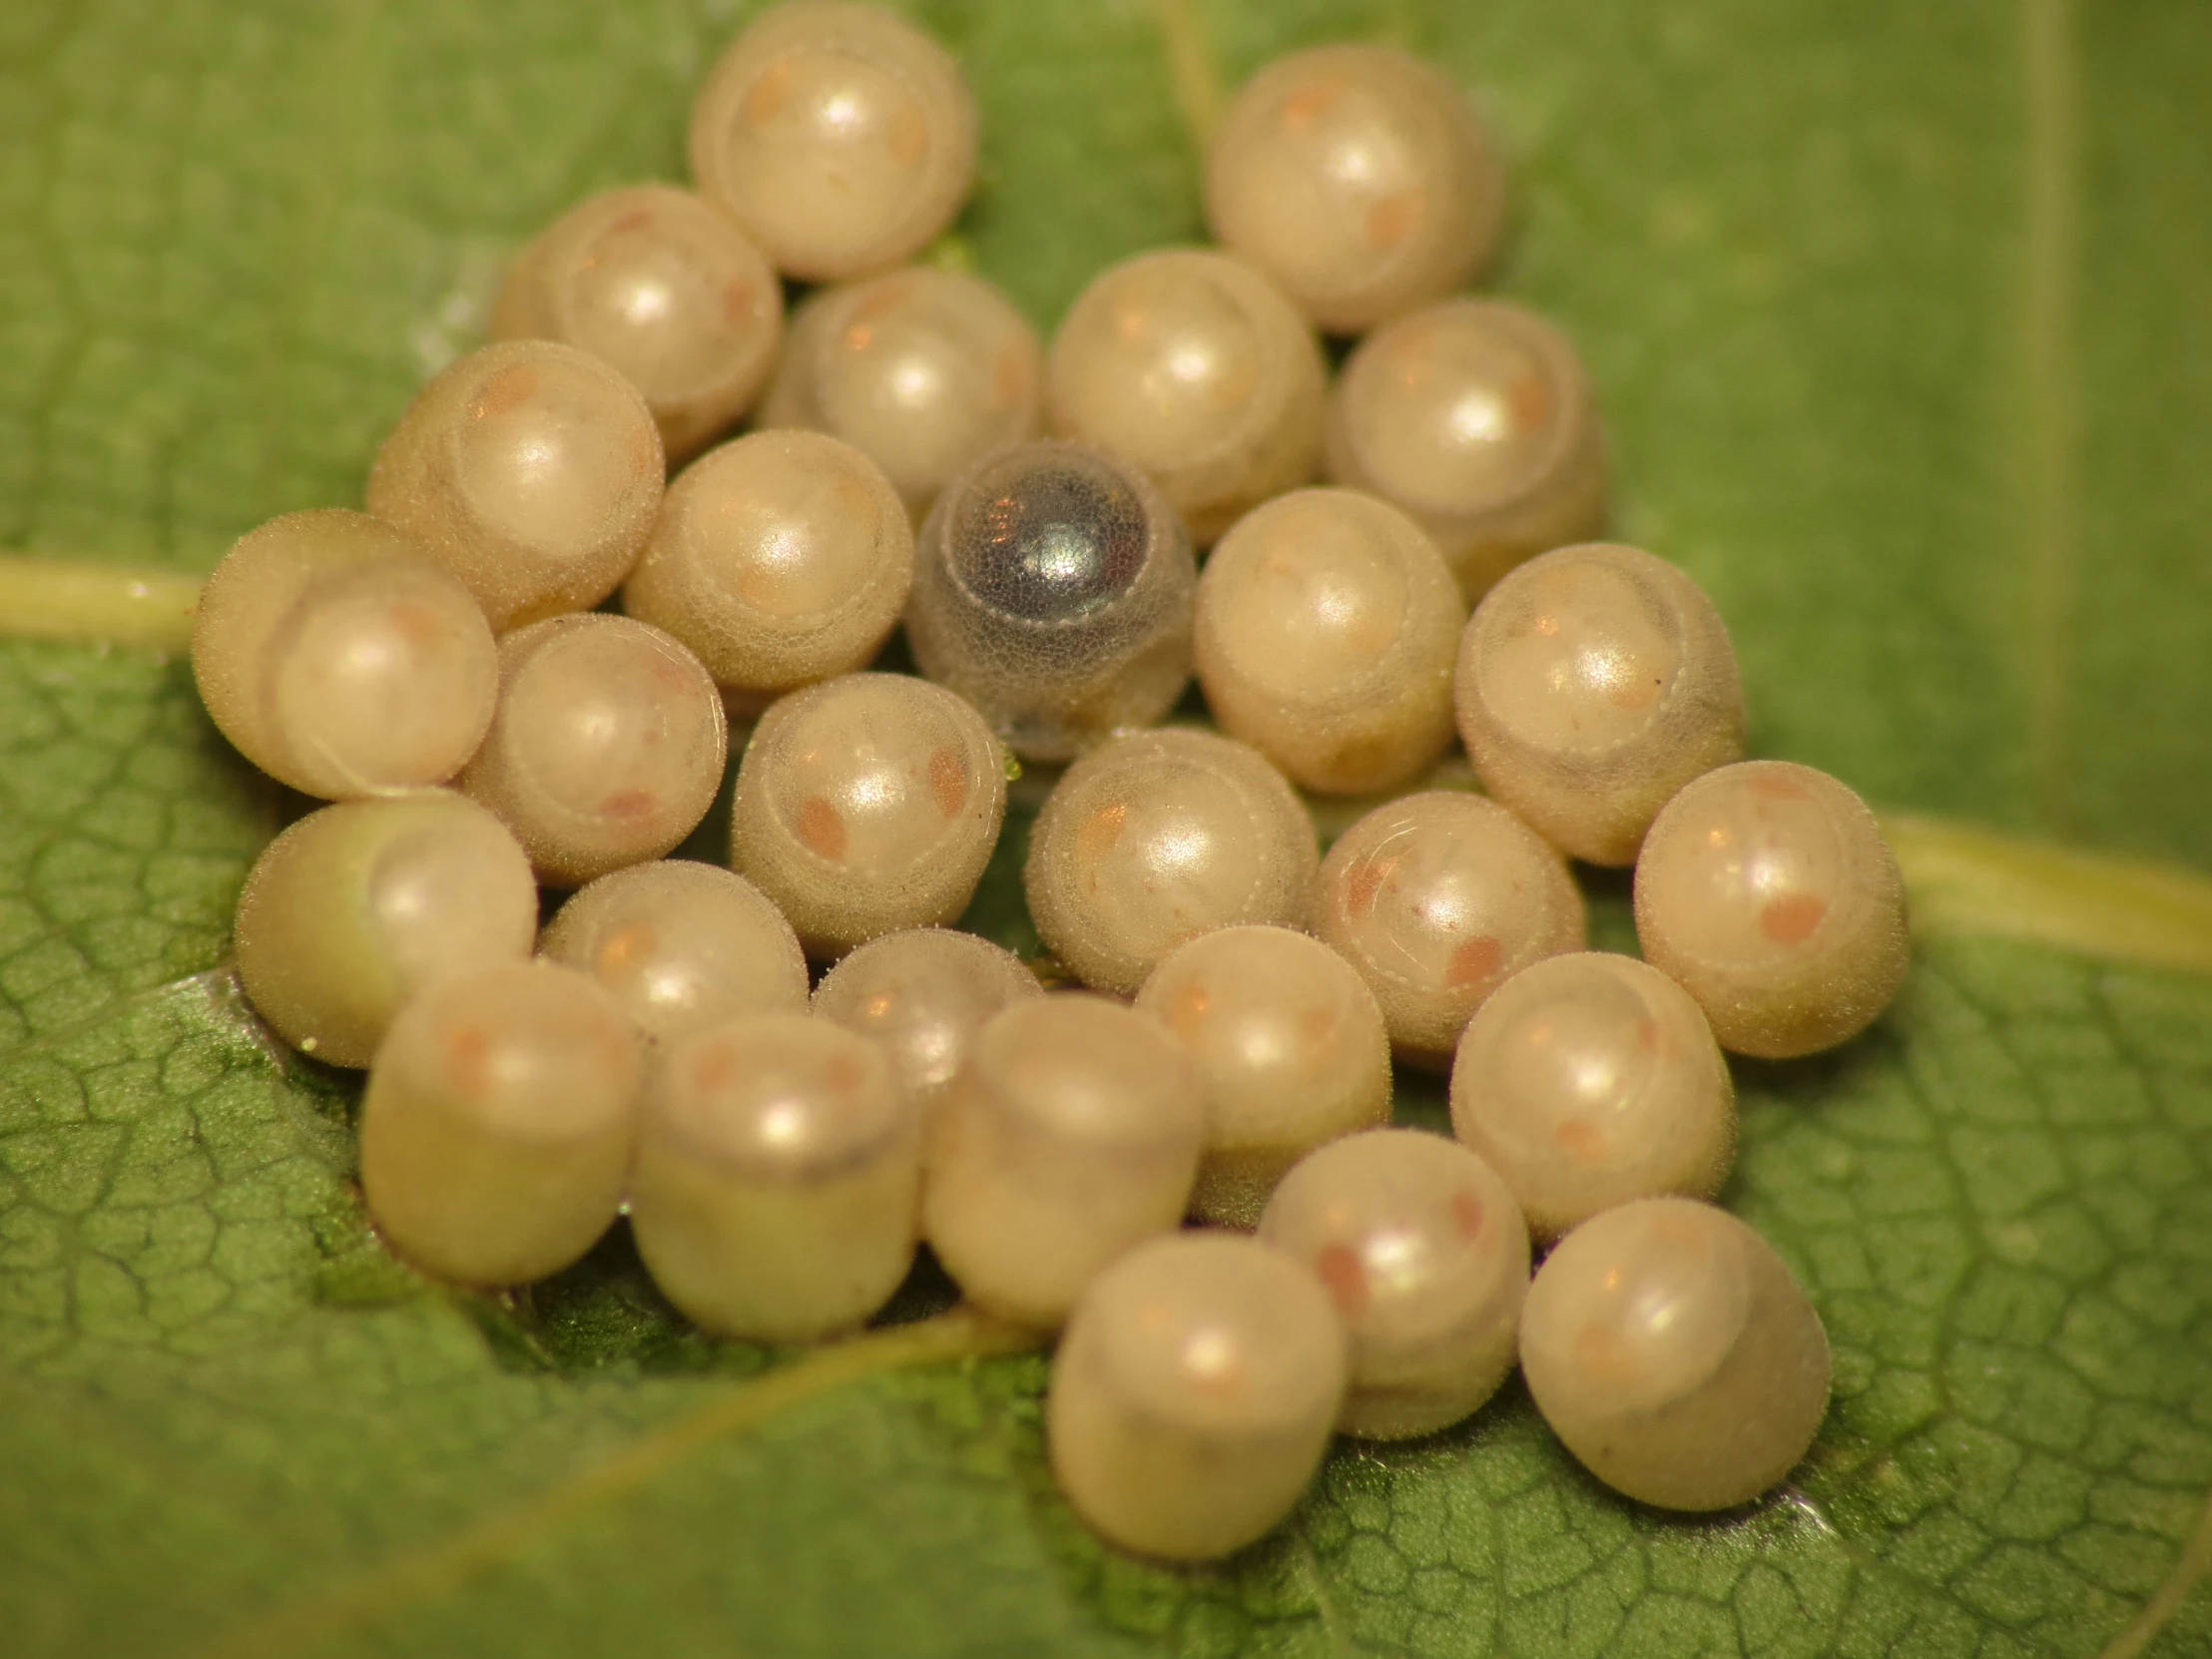 a collection of brown eggs sit on the leaf